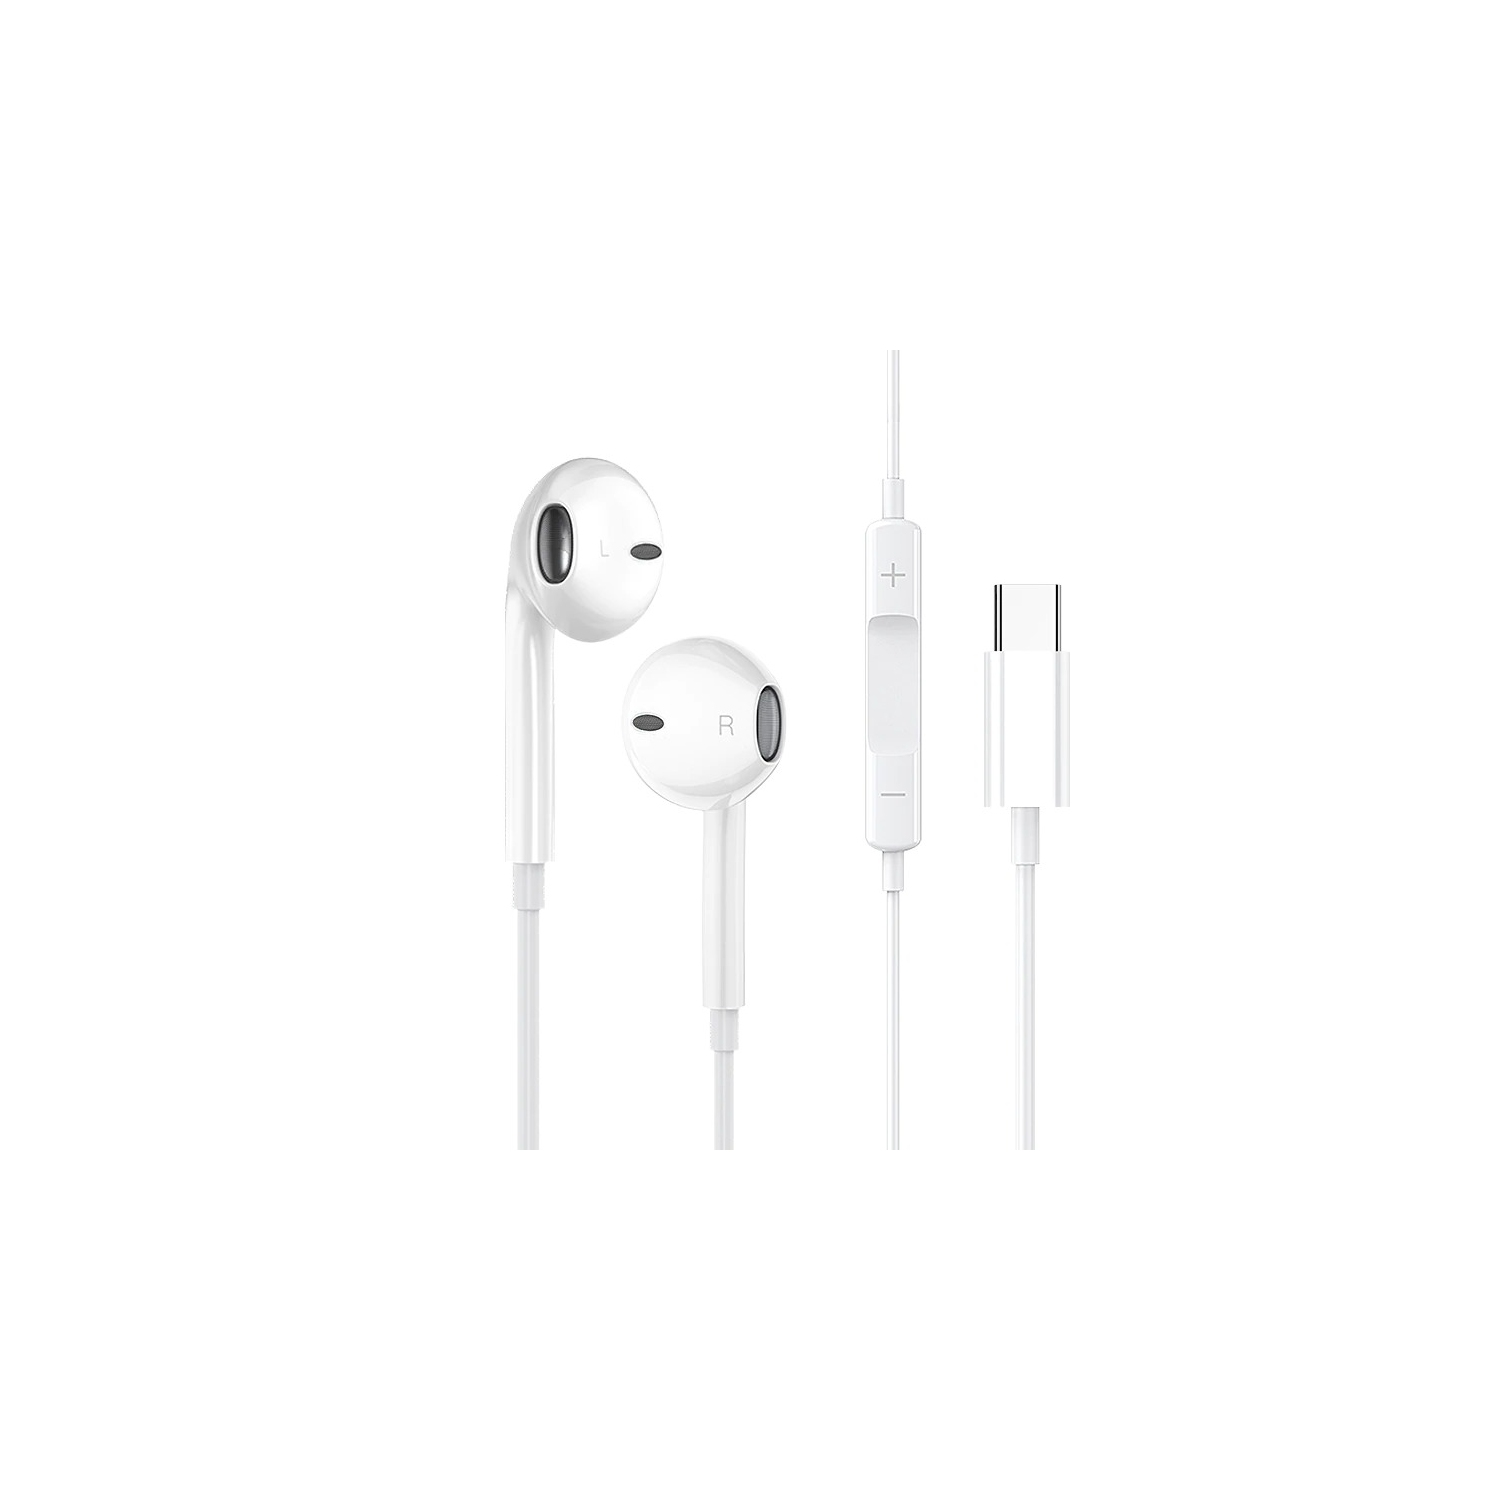 Type C USB-C Earphones Headphones Headsets with Mic & Volume Control for Huawei LG Google Samsung S8 S9 S10 Plus S20 S21 FE S22 Ultra Note, White